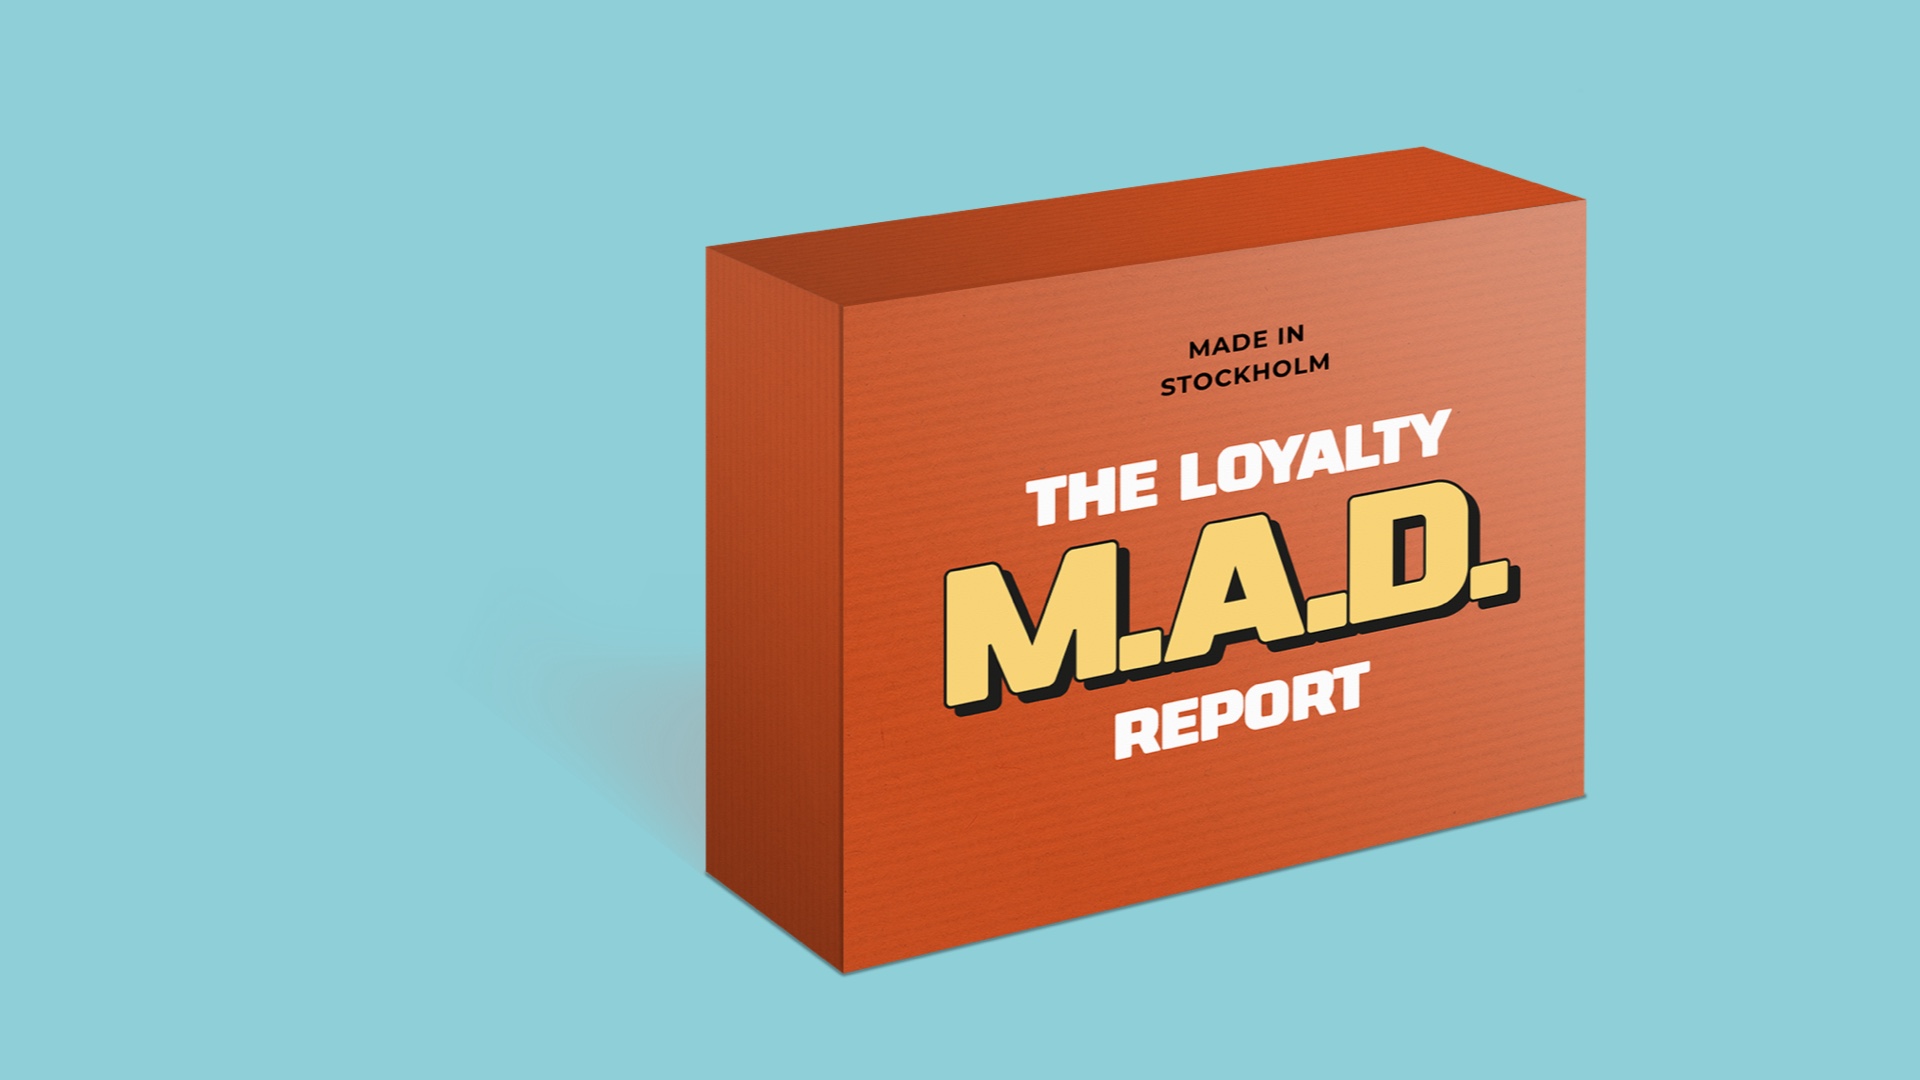 The Loyalty M.A.D. Report